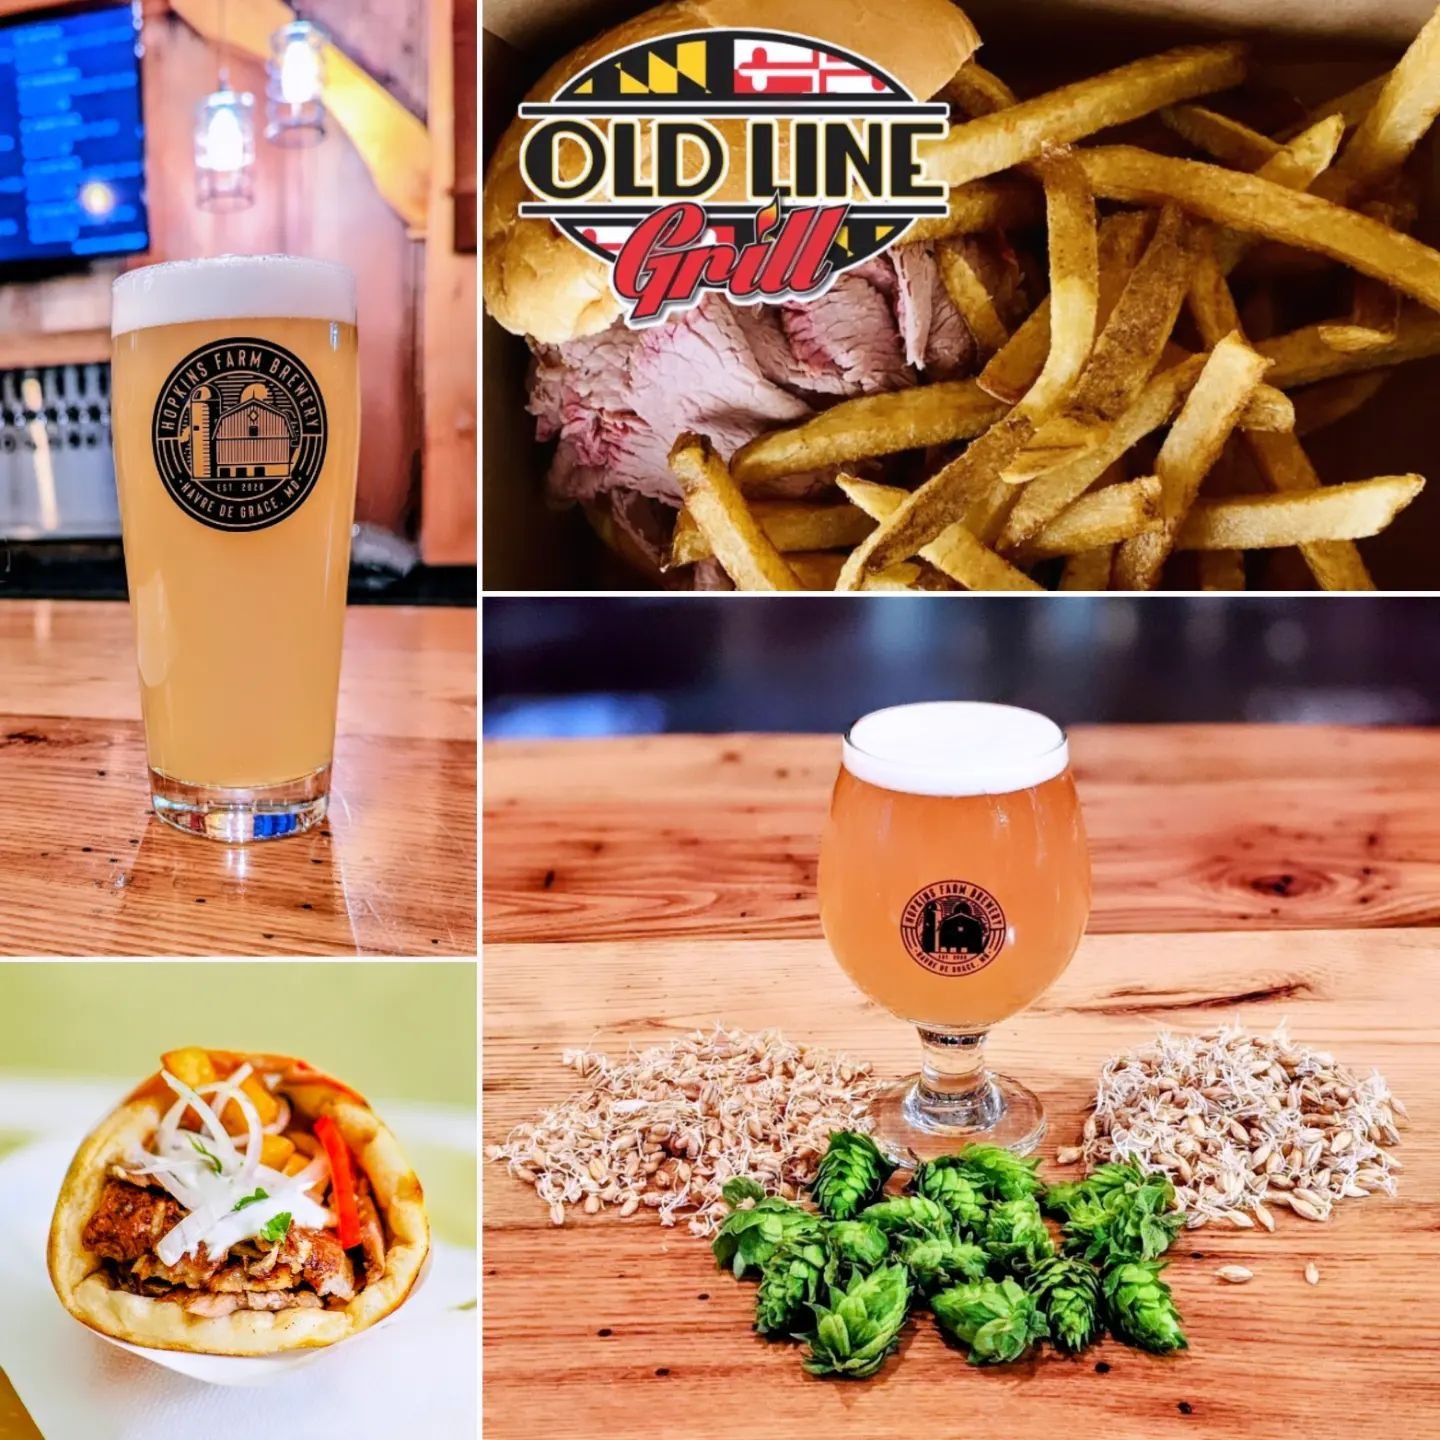 Join us today for a farm fresh beer, a gyro from @eatlikeagreekmd, and a pit sandwich from @oldlinegrill!

Unfortunately the Old Glory Music Festival has been postponed due to the weather.